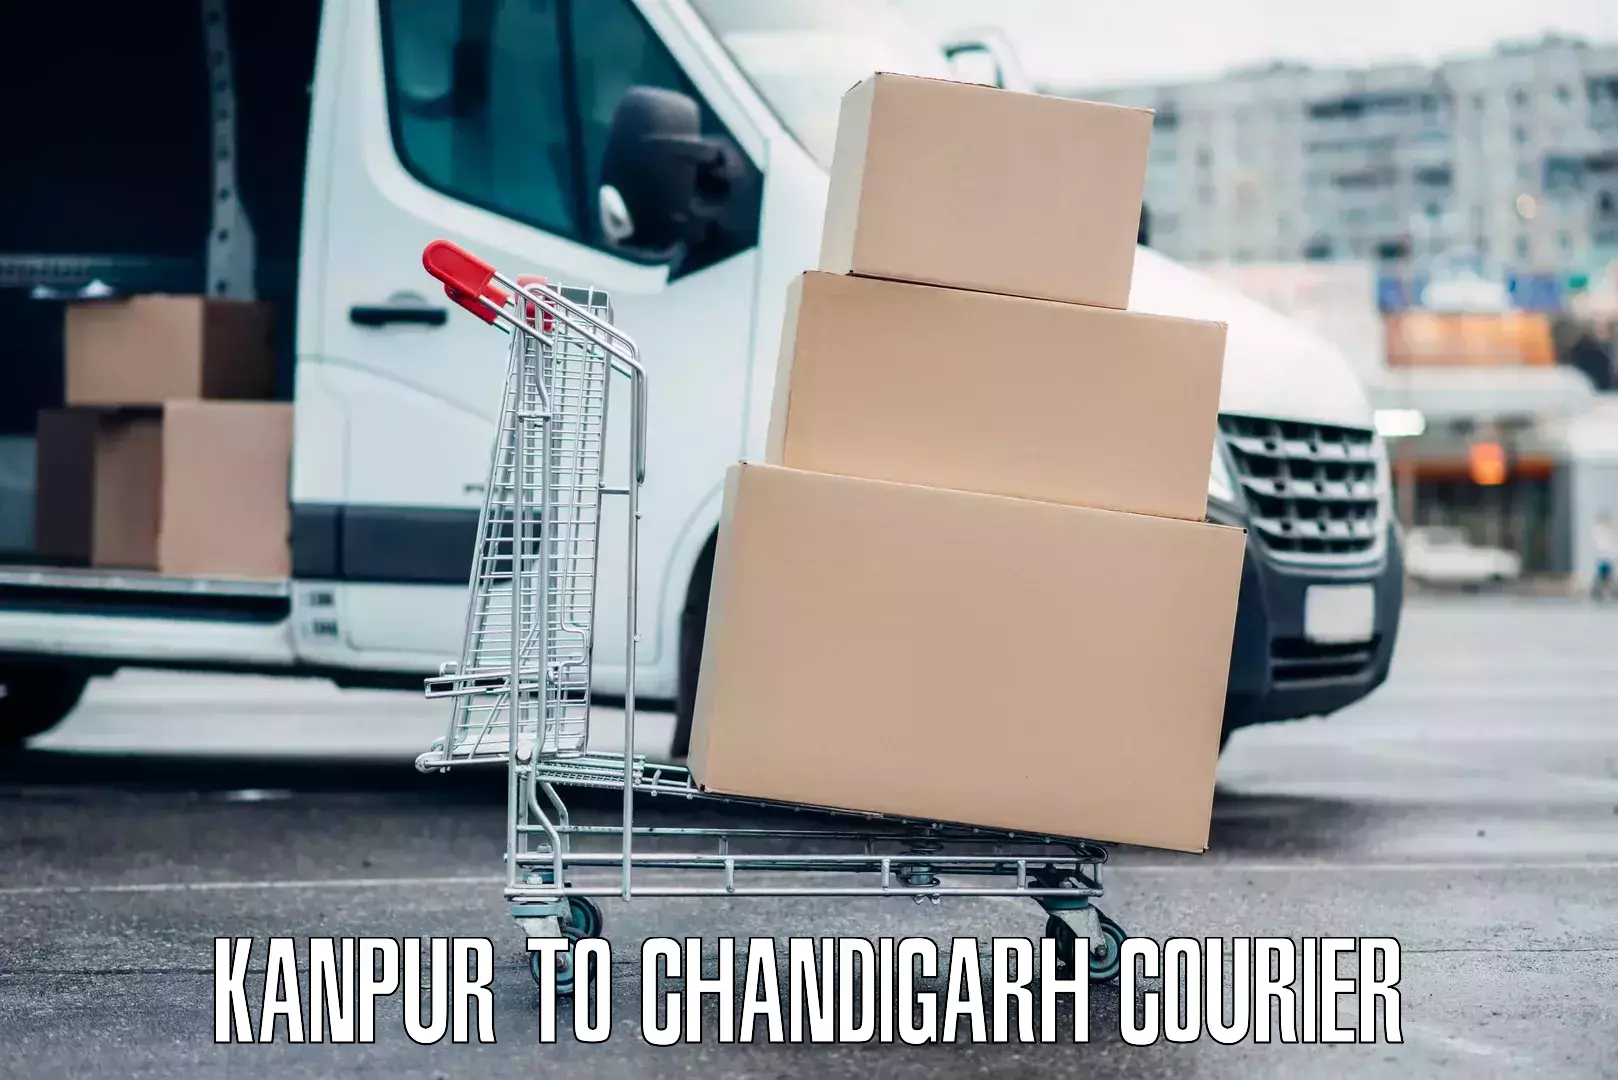 Luggage shipment tracking Kanpur to Chandigarh